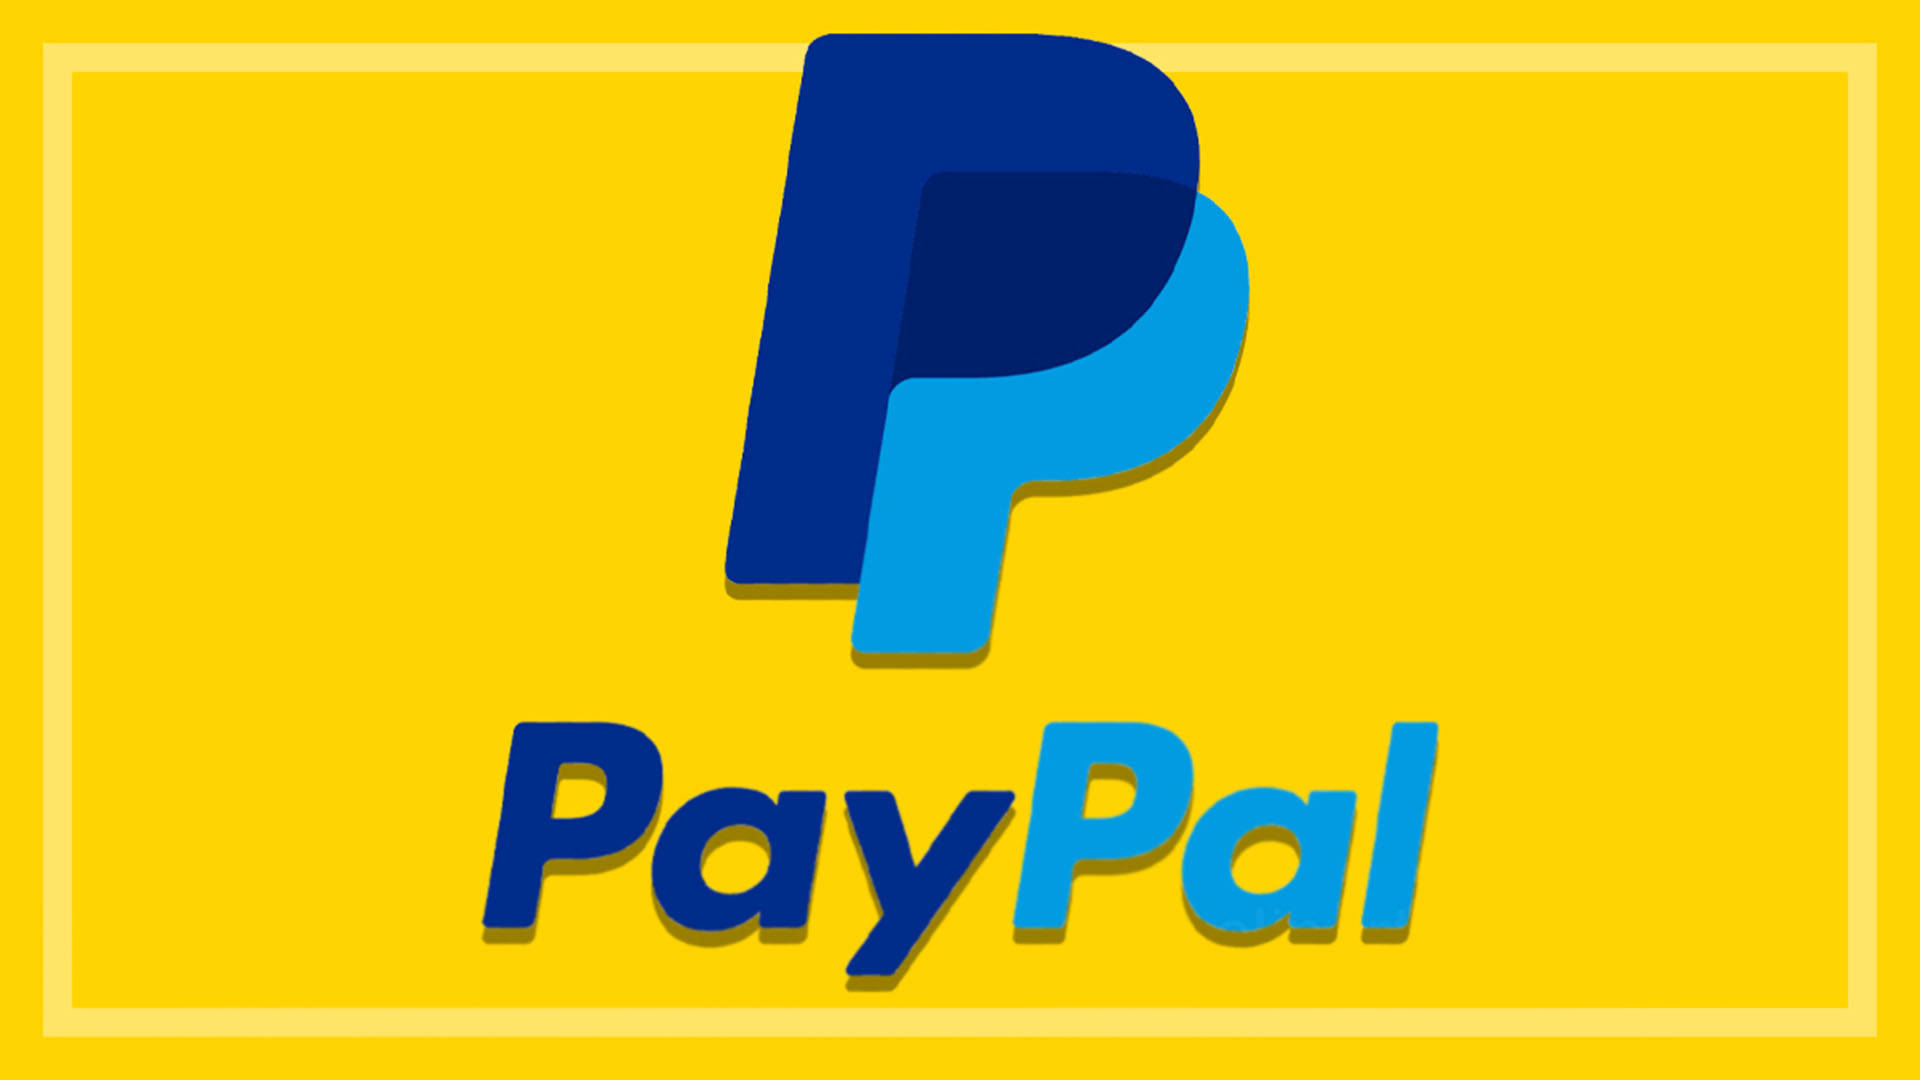 Paypal In Yellow Background Wallpaper